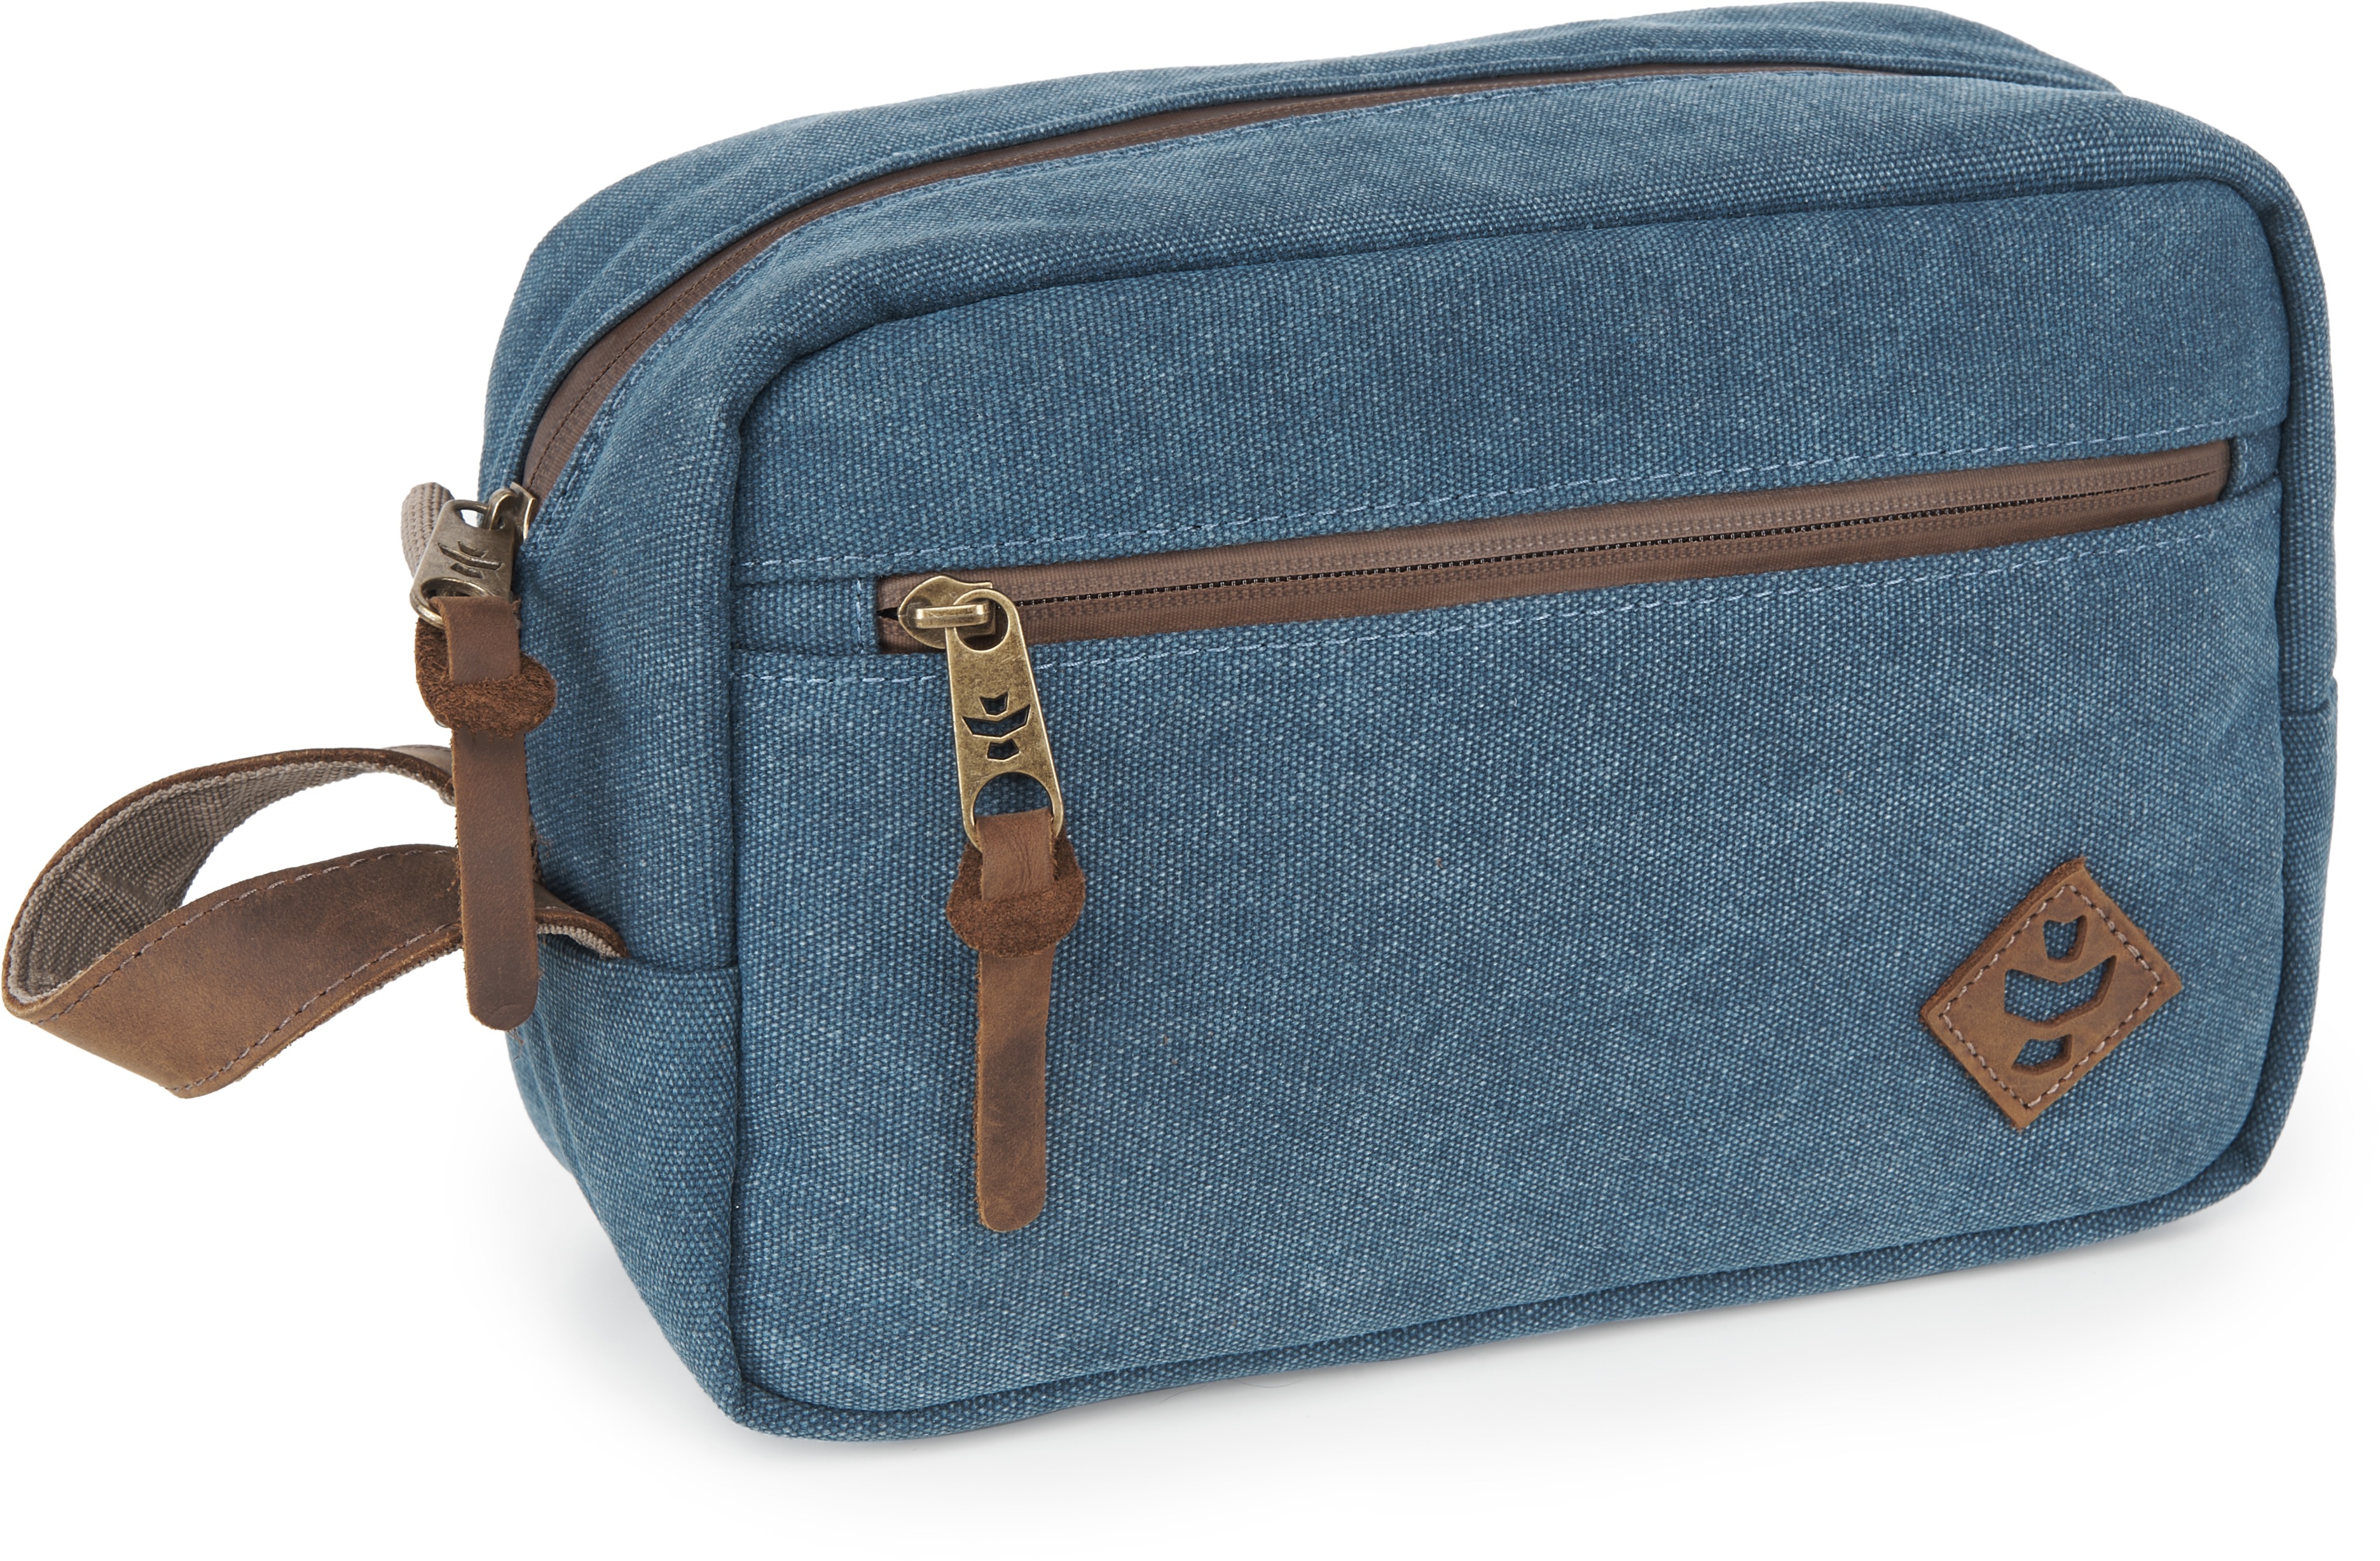 Picture for Revelry Supply The Stowaway Toiletry Kit, Marine